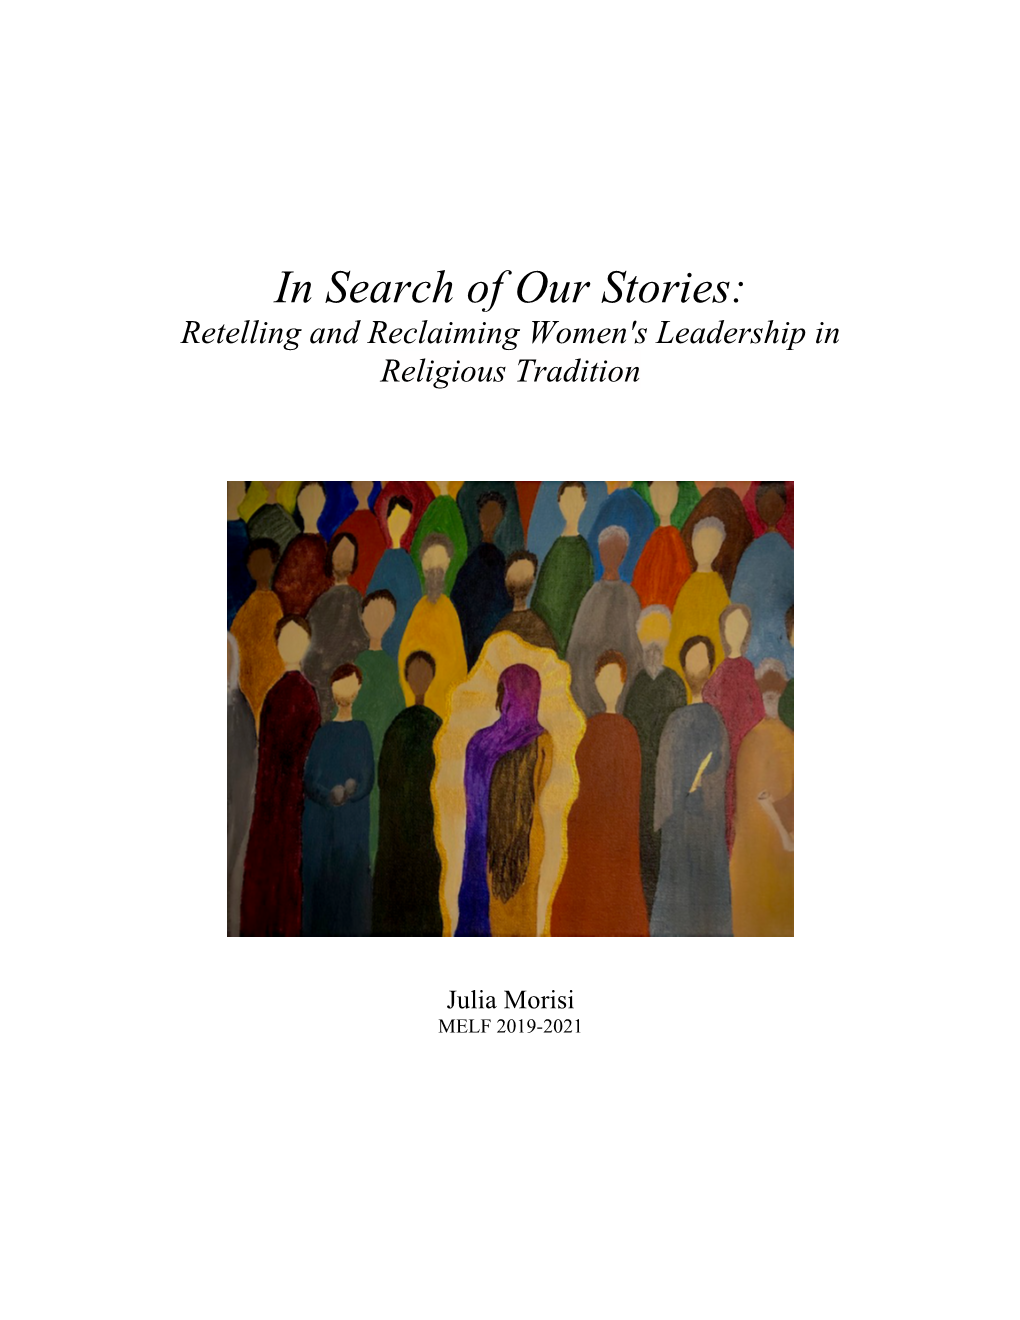 In Search of Our Stories: Retelling and Reclaiming Women's Leadership in Religious Tradition